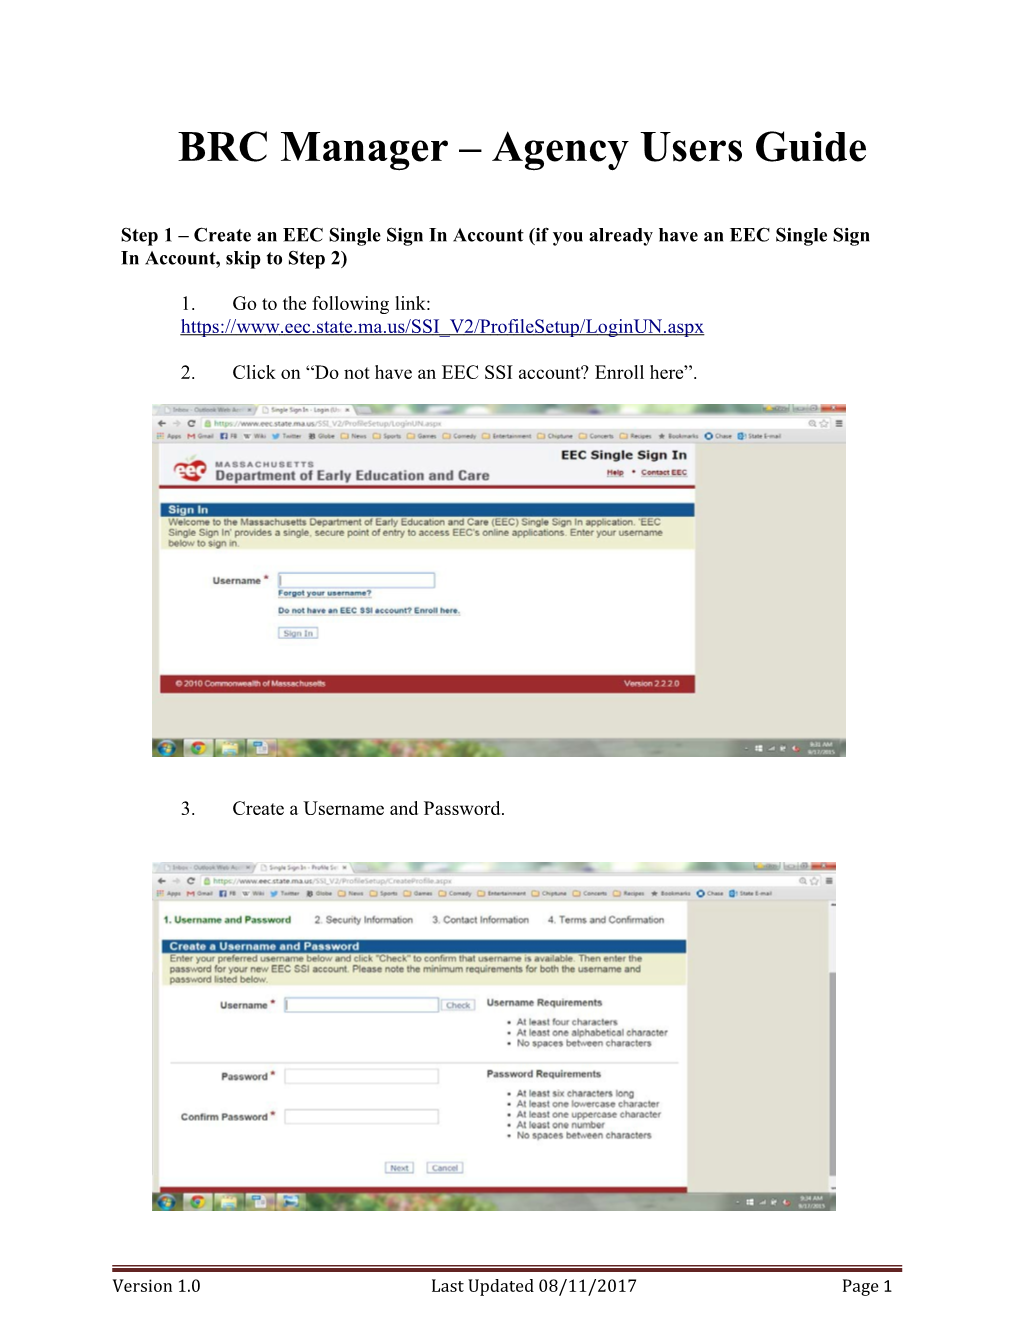 BRC Manager Agency Users Guide